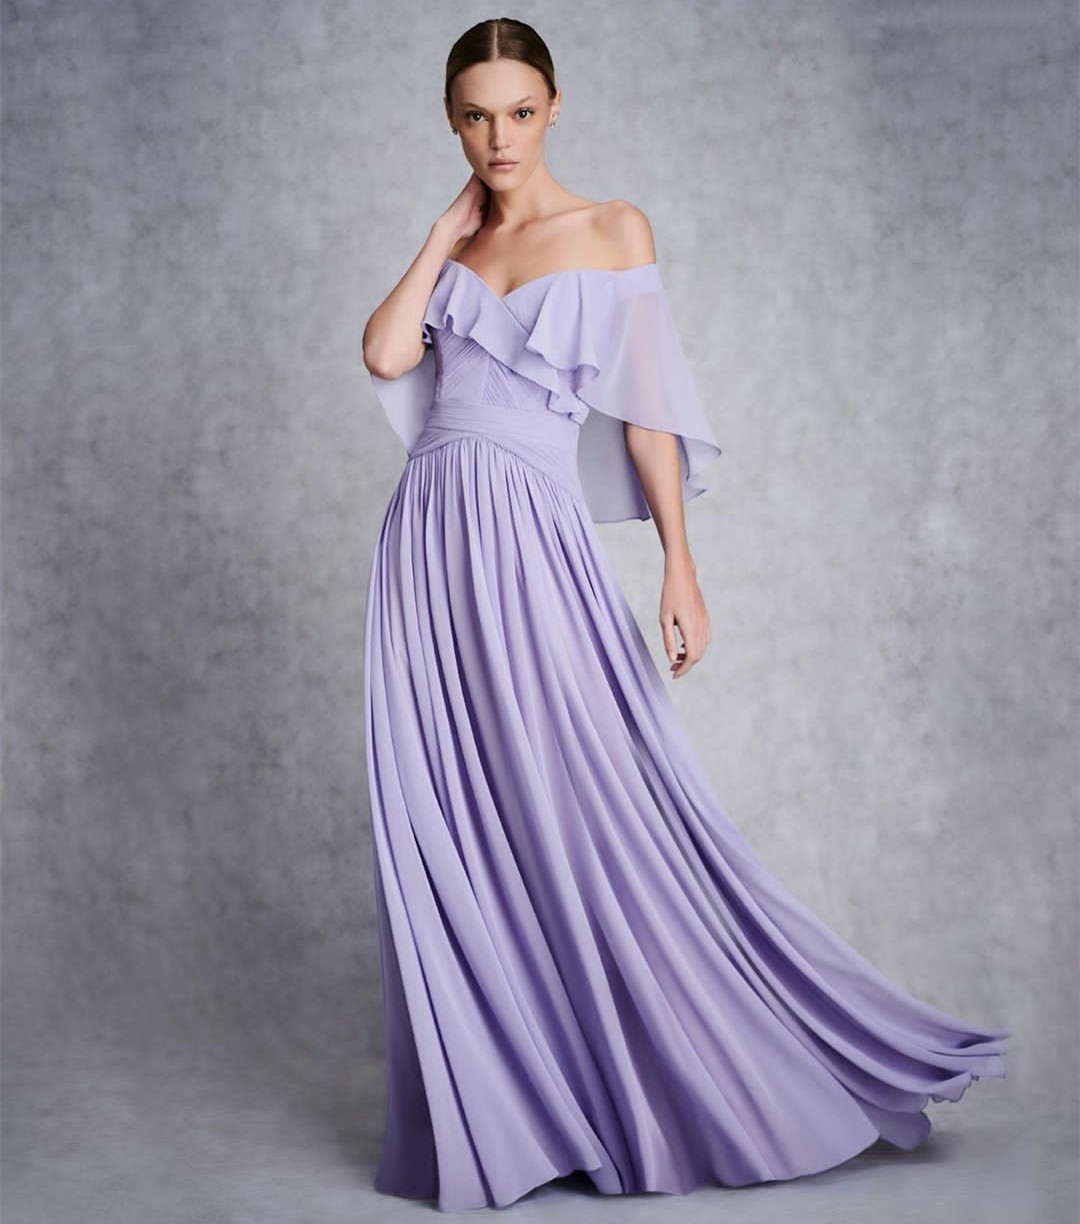 Vintage Long Chiffon Lilac Prom Dresses With Ruffles A-Line Off Shoulder Floor Length Pleats Formal Party Evening Dress Robes de Soiree for Women